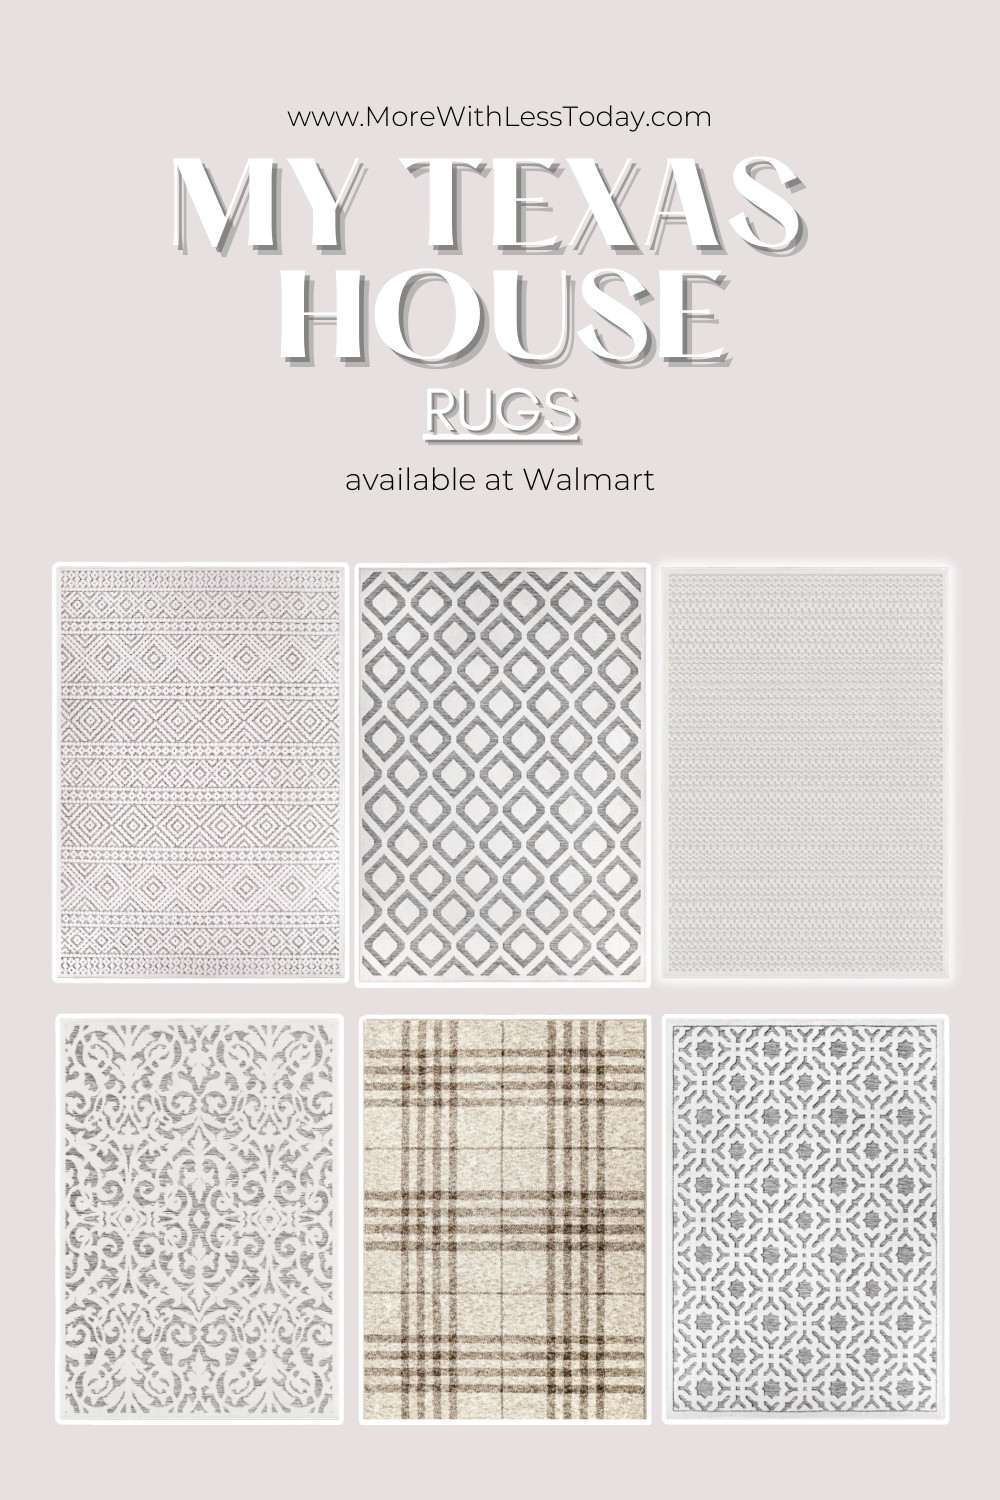 My Texas House rugs from Walmart